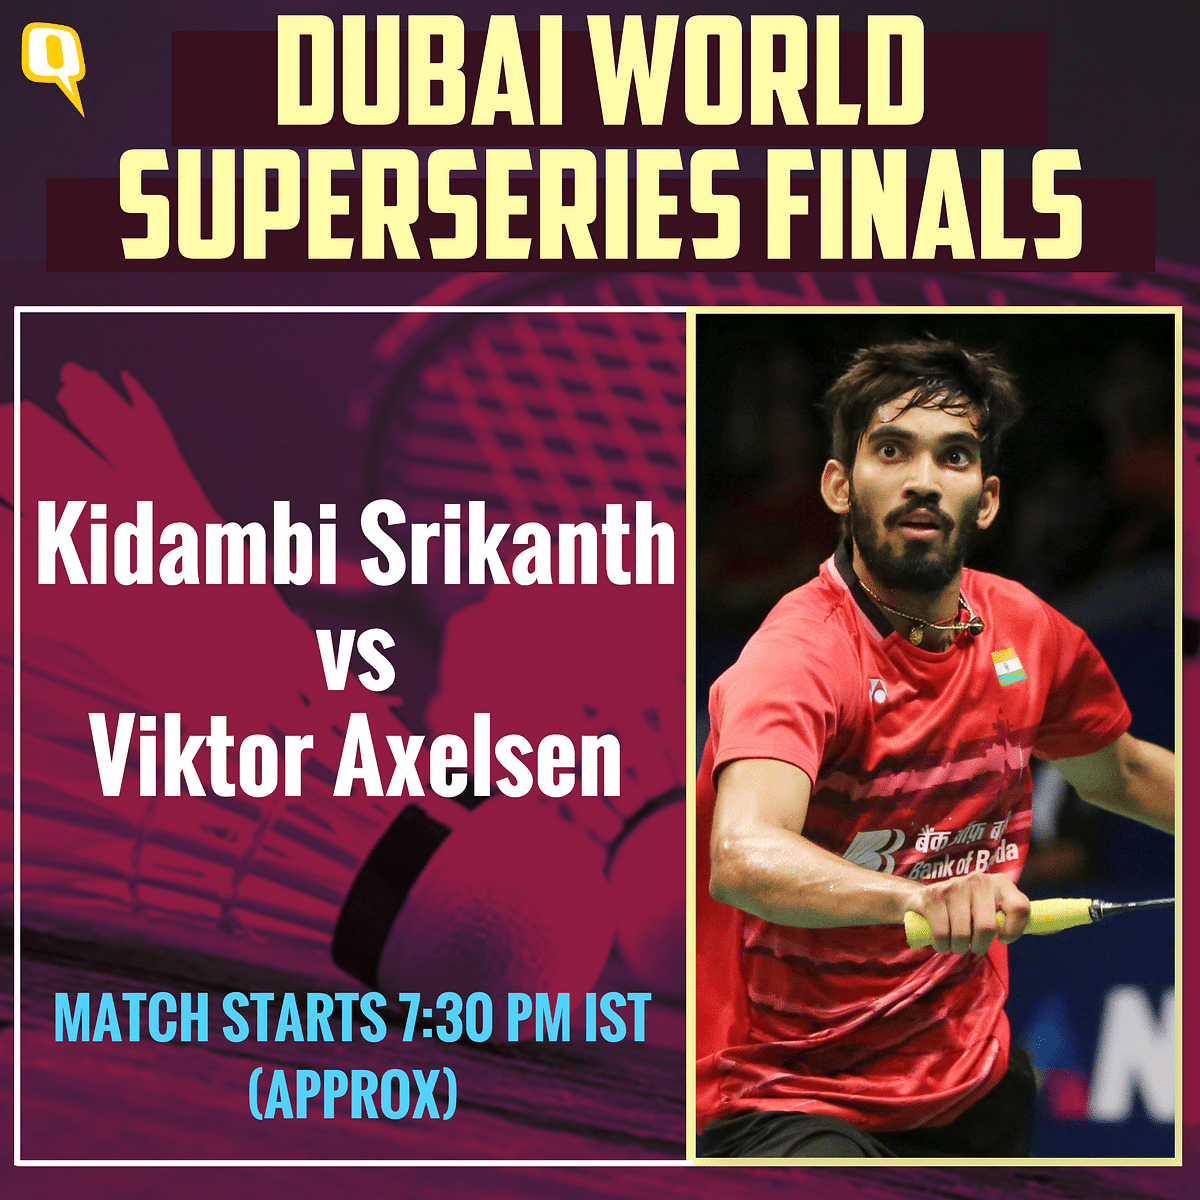 PV Sindhu and Kidambi Srikanth would be aiming for a great finale to what has been a good year for Indian badminton.